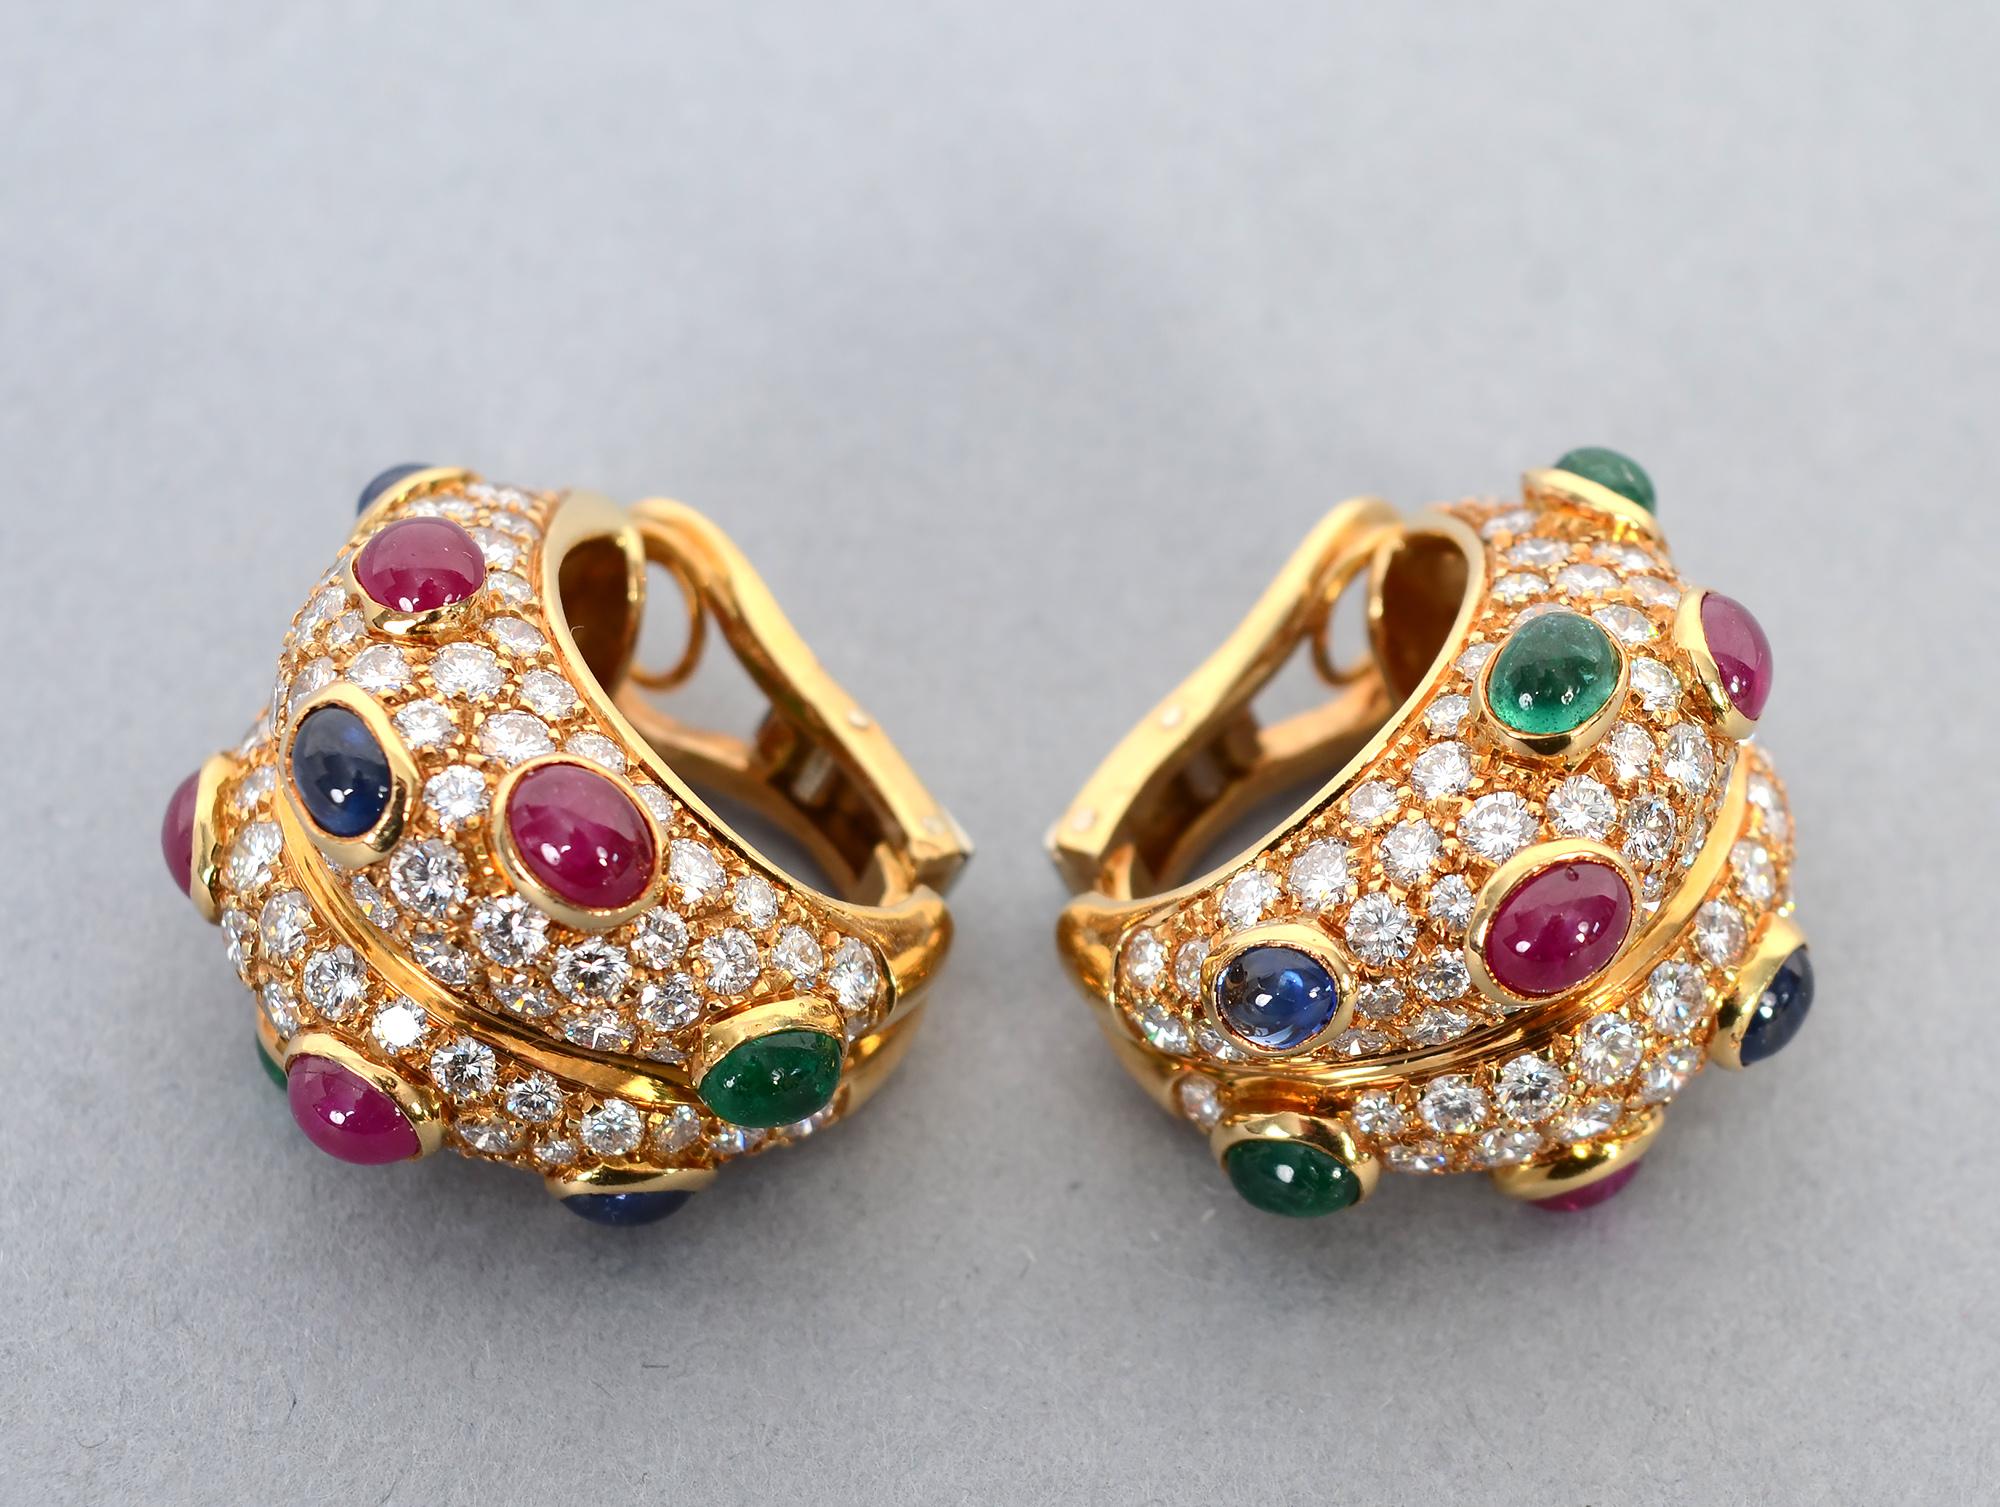 Elegant and exciting half hoop 18 karat gold earrings that have 9 carats of diamonds. The stones are F-G color; VVS - VS quality. In addition, they are studded with cabochon rubies, emeralds and sapphires. The earrings measure 5/8